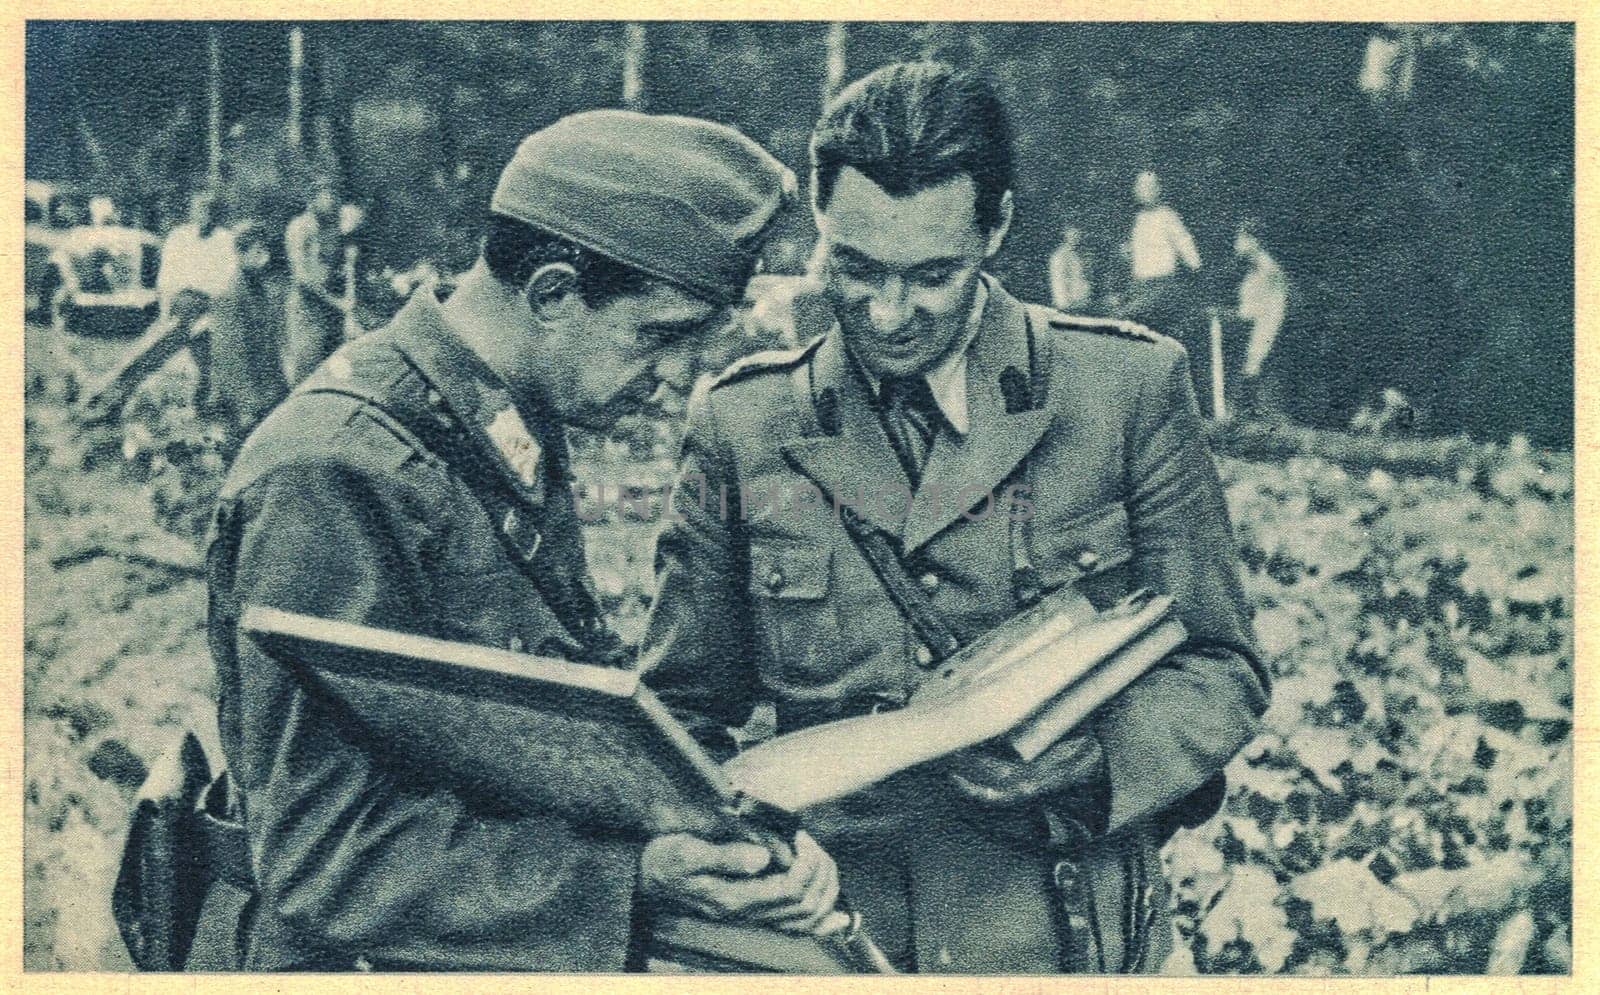 HUNGARY - 1941: Hungarian and Romanian officers have a conversation. World War 2. Axis - Tripartite Pact and states that adhered to the Tripartite Pact.